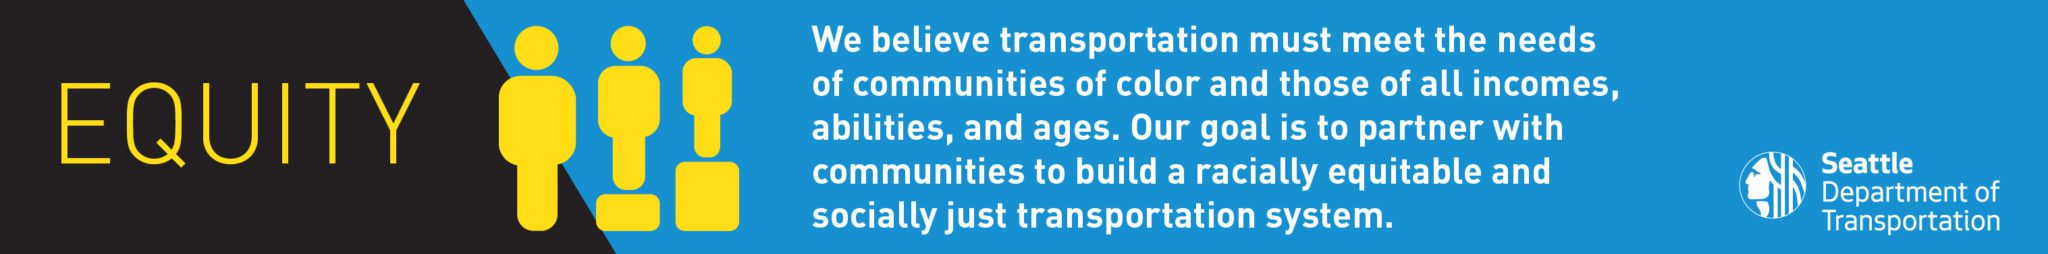 Equity: We believe transportation must meet the needs of communities of color and those of all incomes, abilities, and ages. Our goal is to partner with communities to build a racially equitable and socially just transportation system.